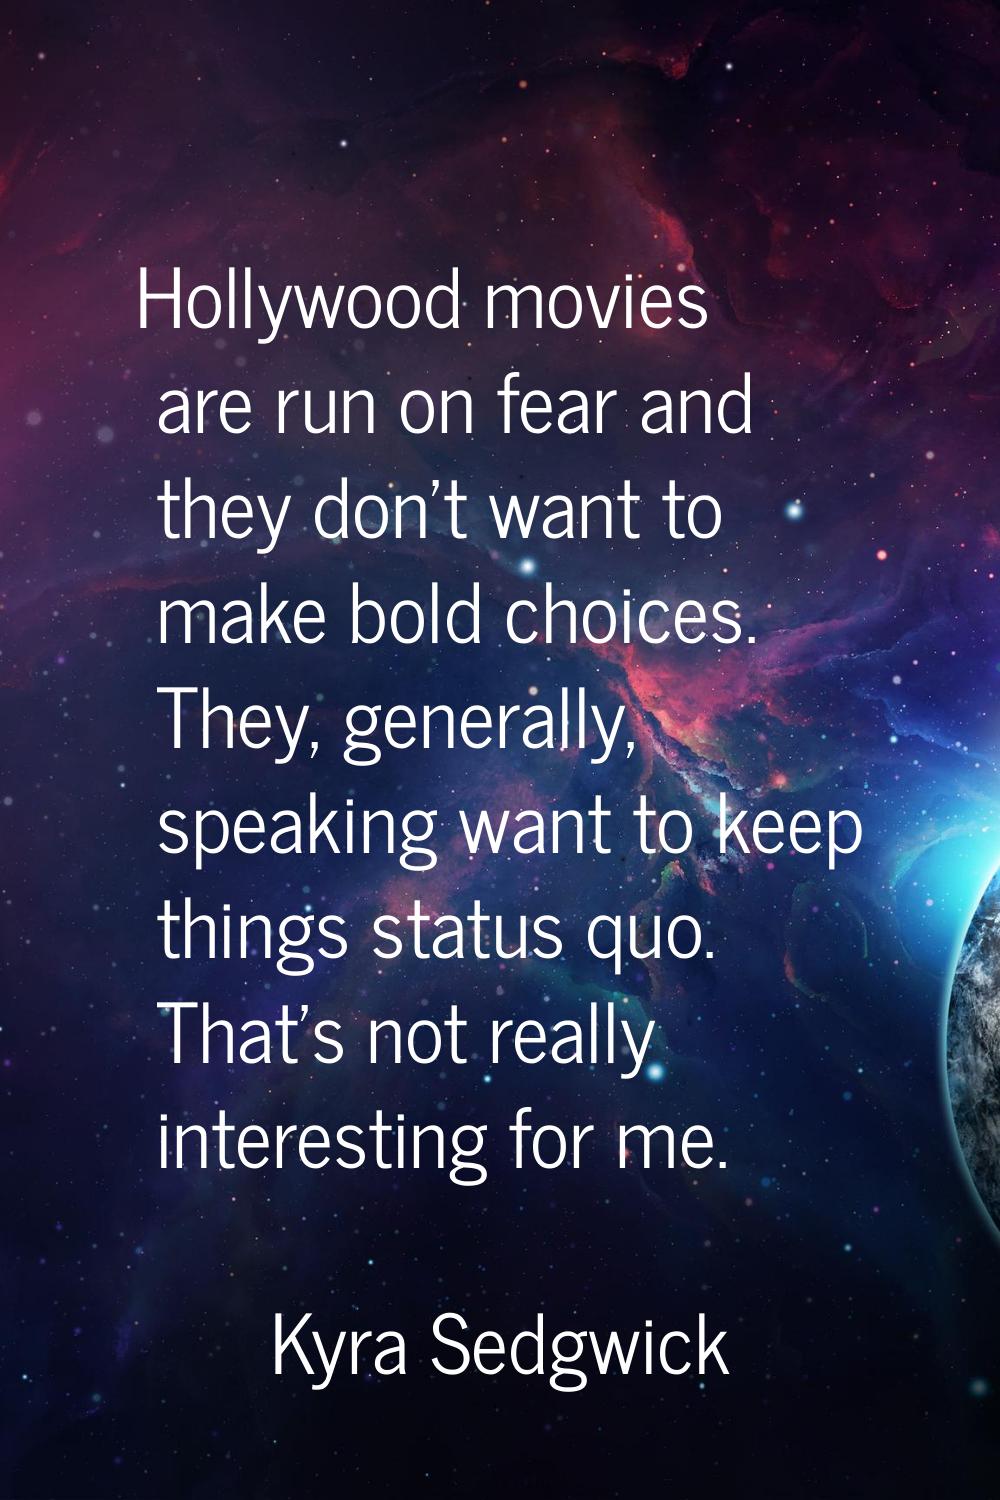 Hollywood movies are run on fear and they don't want to make bold choices. They, generally, speakin